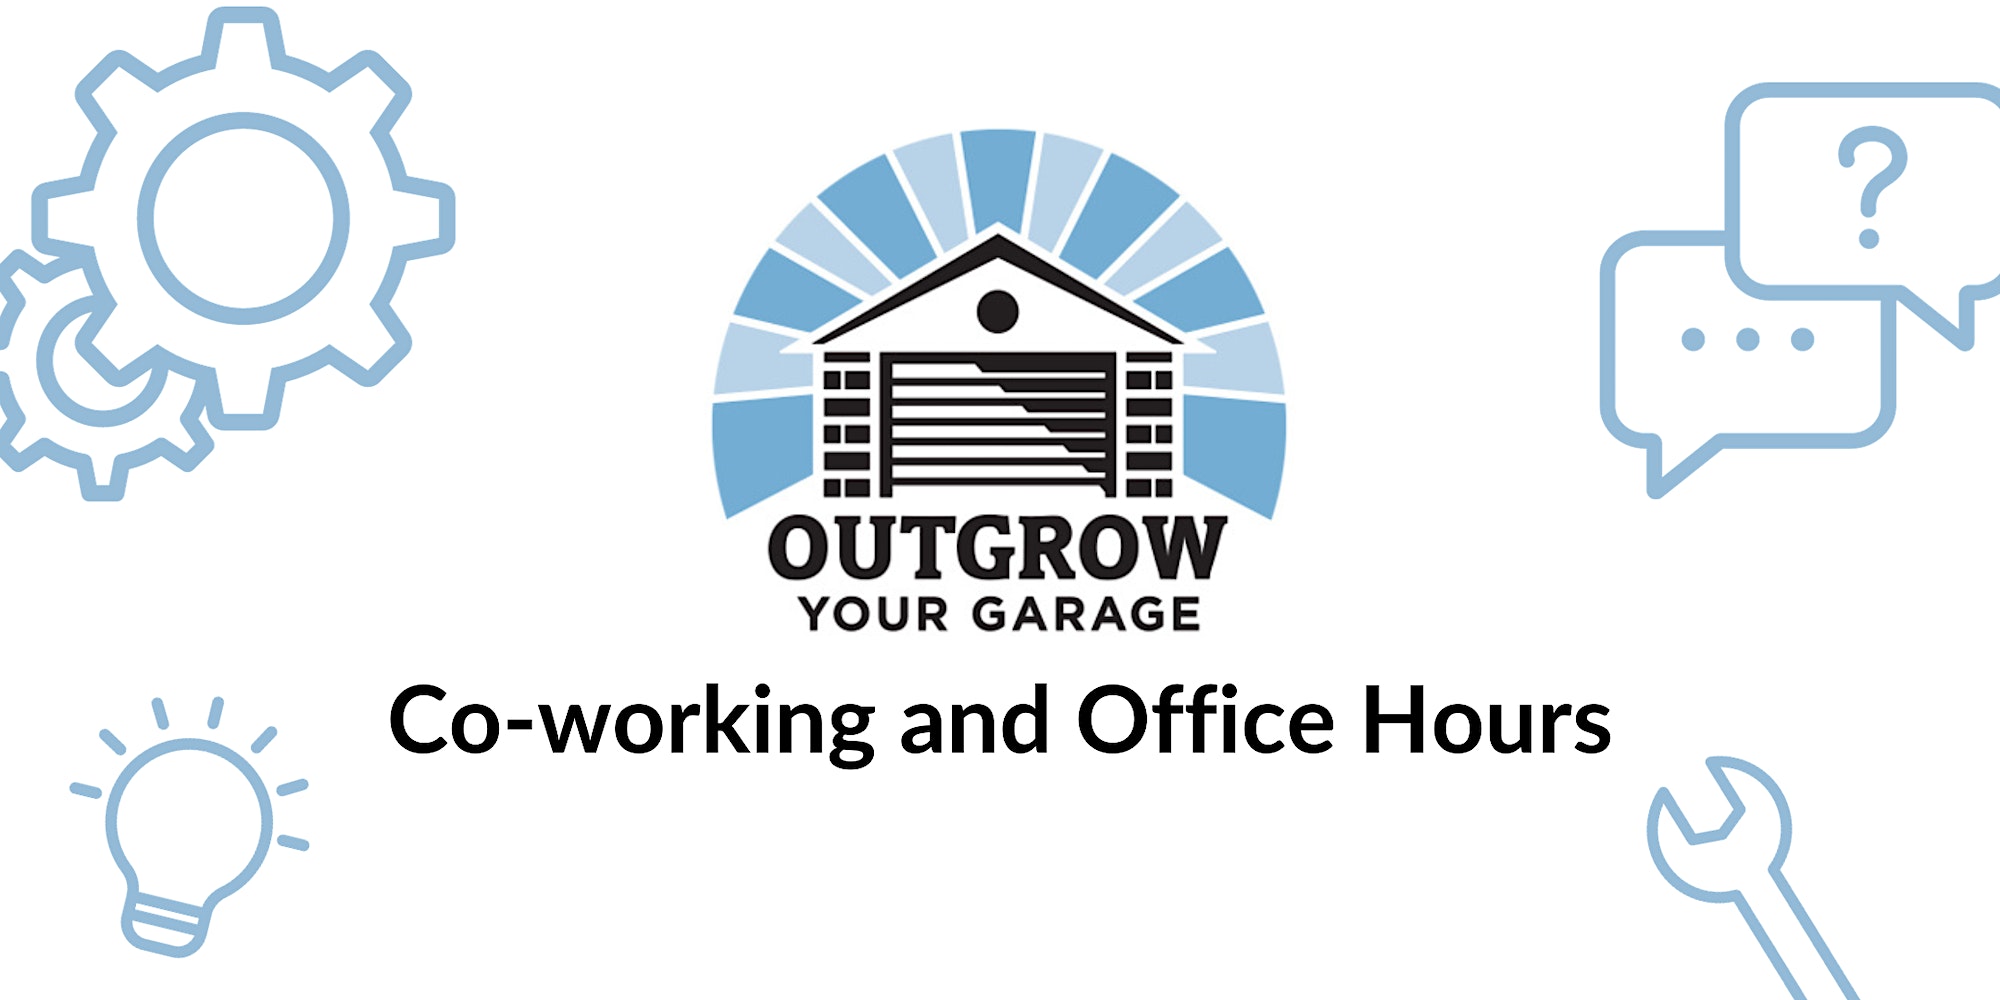 Outgrow Your Garage Co-working and Office Hours